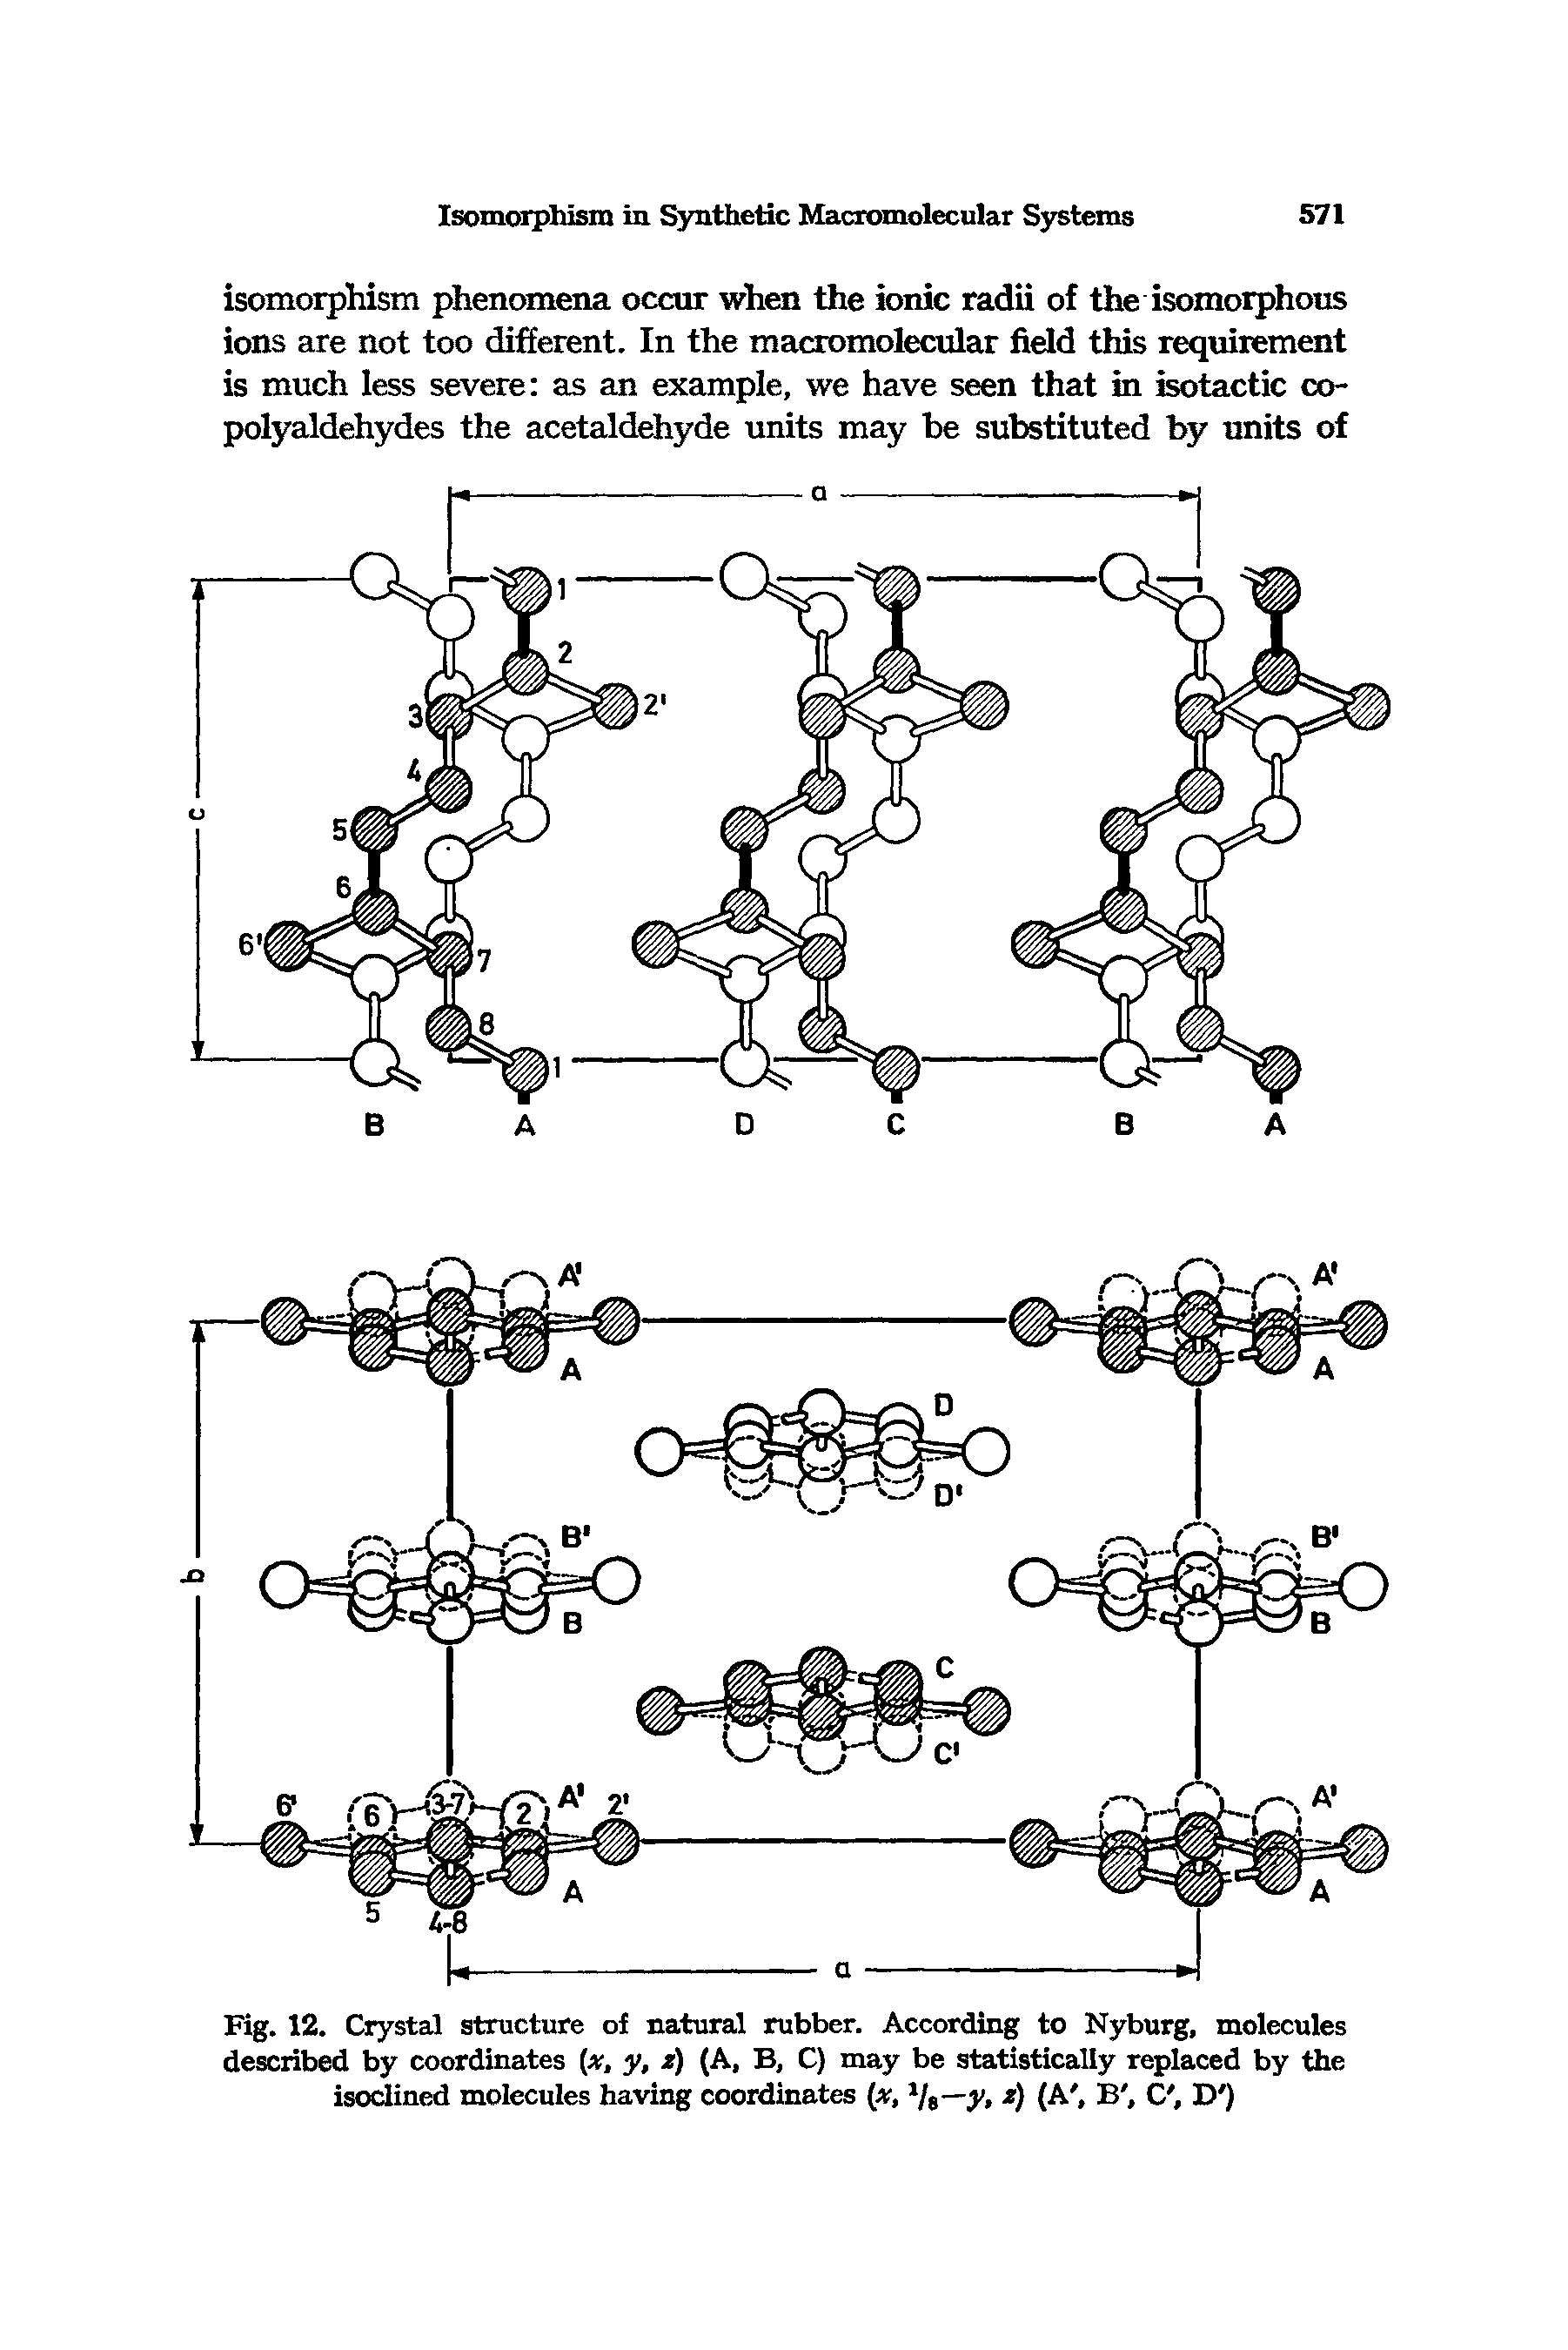 Fig. 12. Crystal structure of natural rubber. According to Nyburg, molecules described by coordinates (x, y, 2) (A, B, C) may be statistically replaced by the isoclined molecules having coordinates (x, Vs— y, ) (A, B, C, D )...